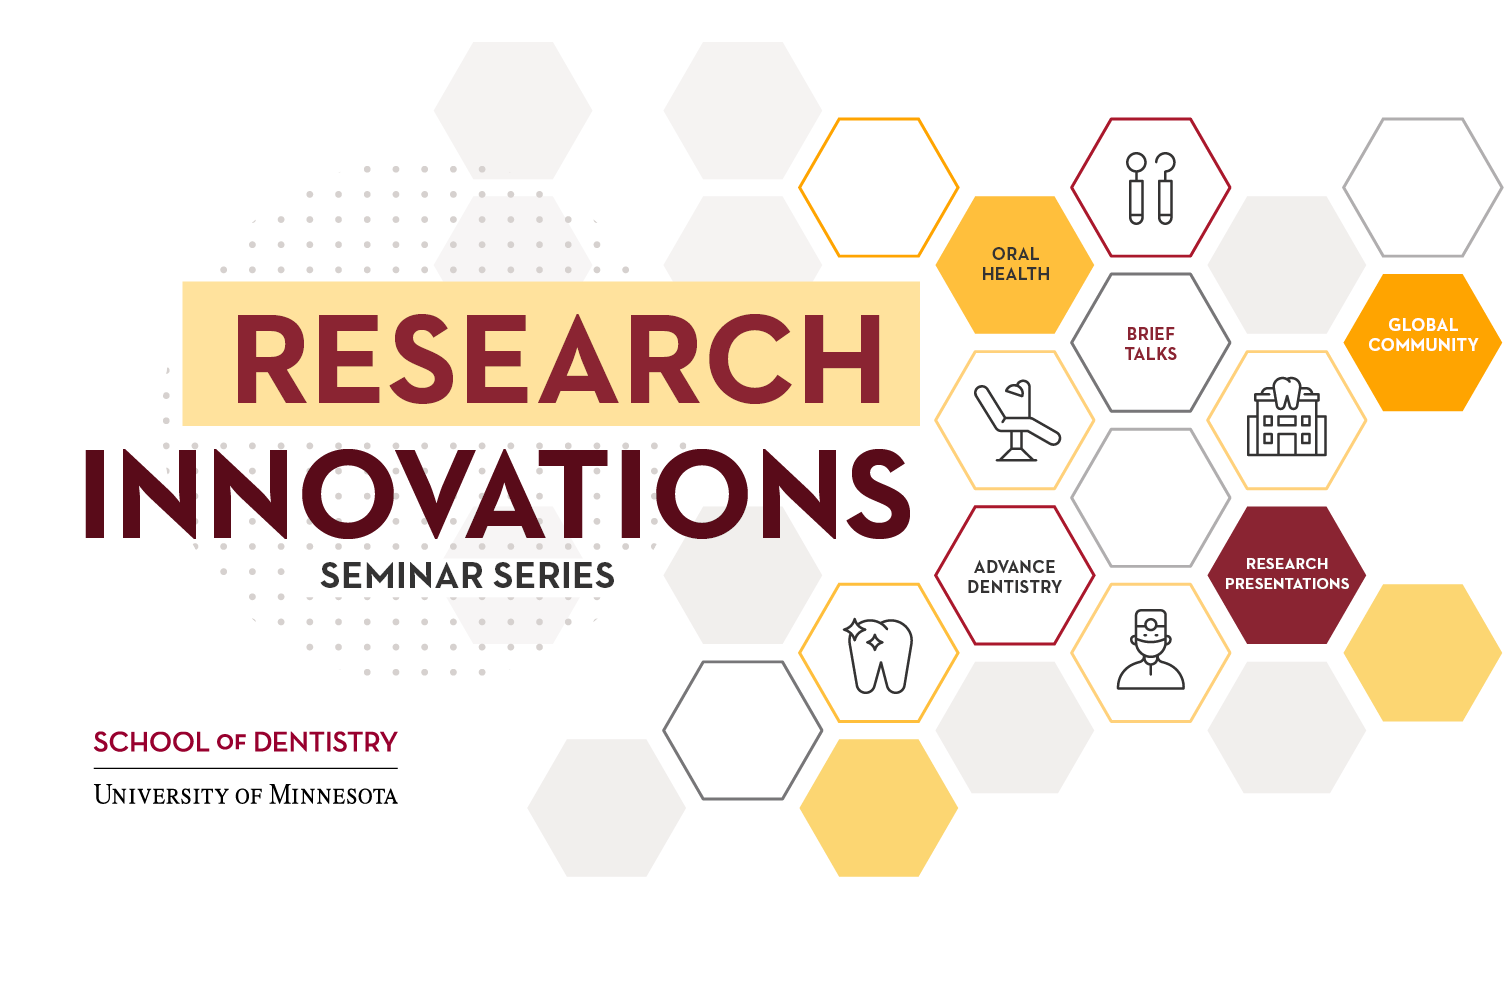 research innovations seminar series graphic 